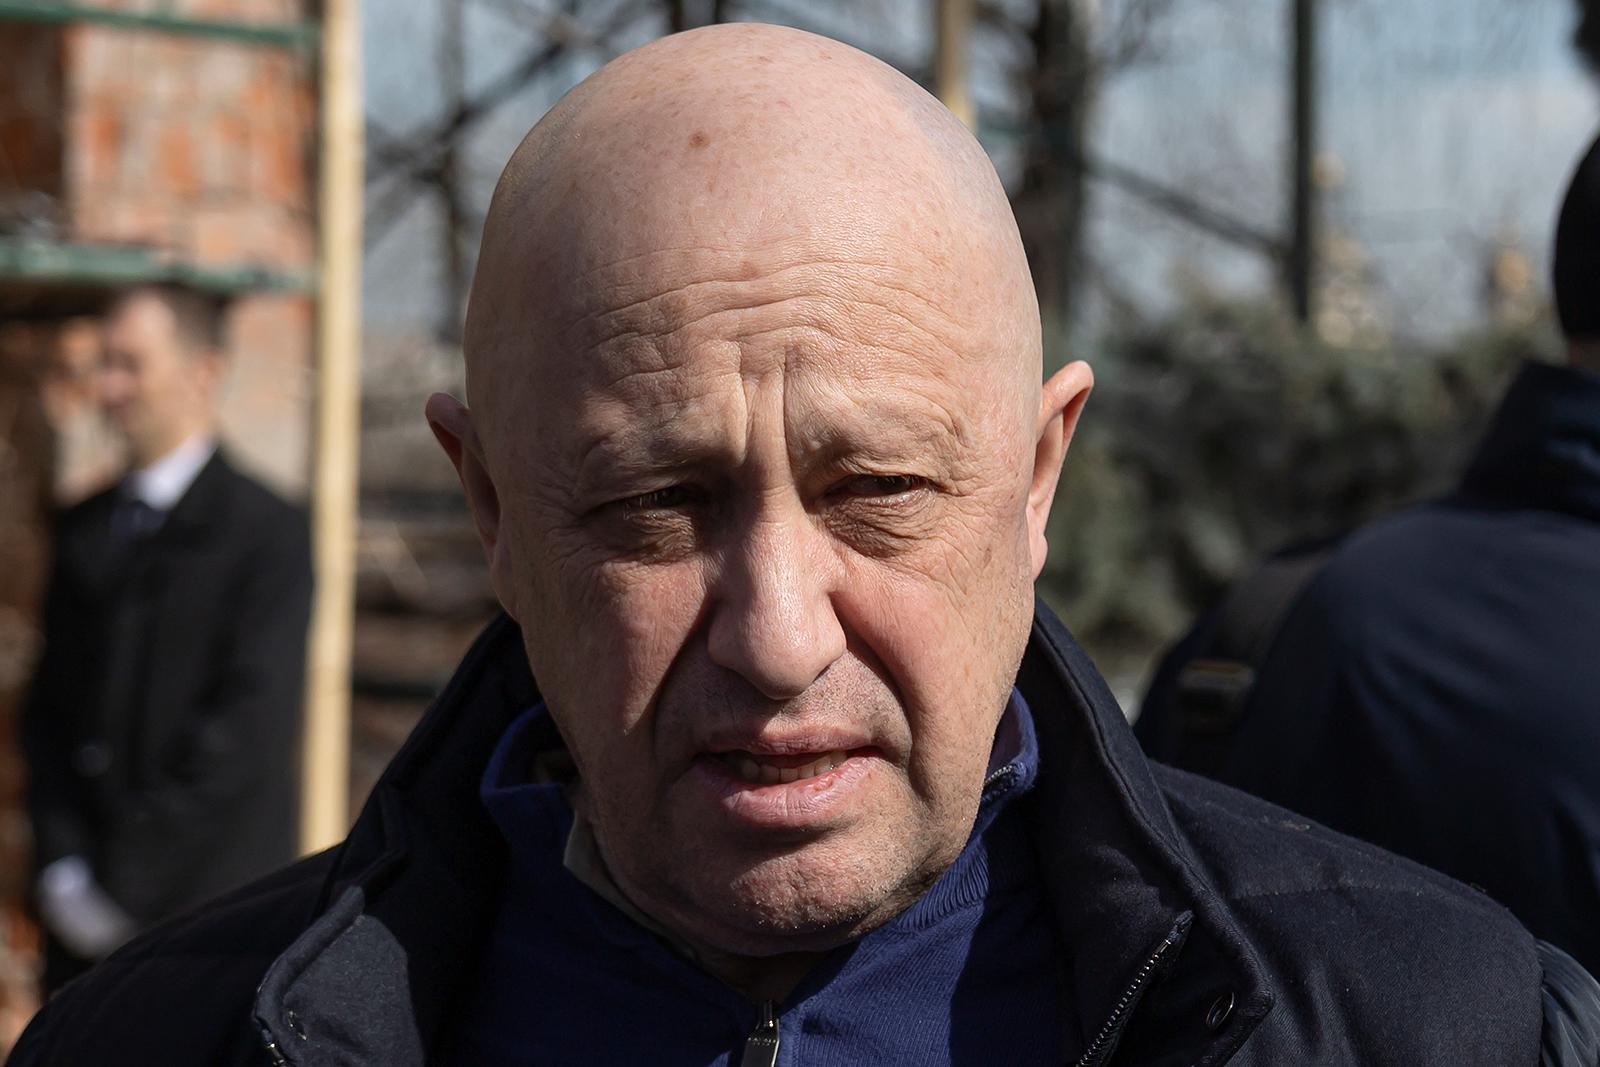 Yevgeny Prigozhin is seen during a funeral at the Troyekurovskoye cemetery in Moscow, Russia, on April 8.